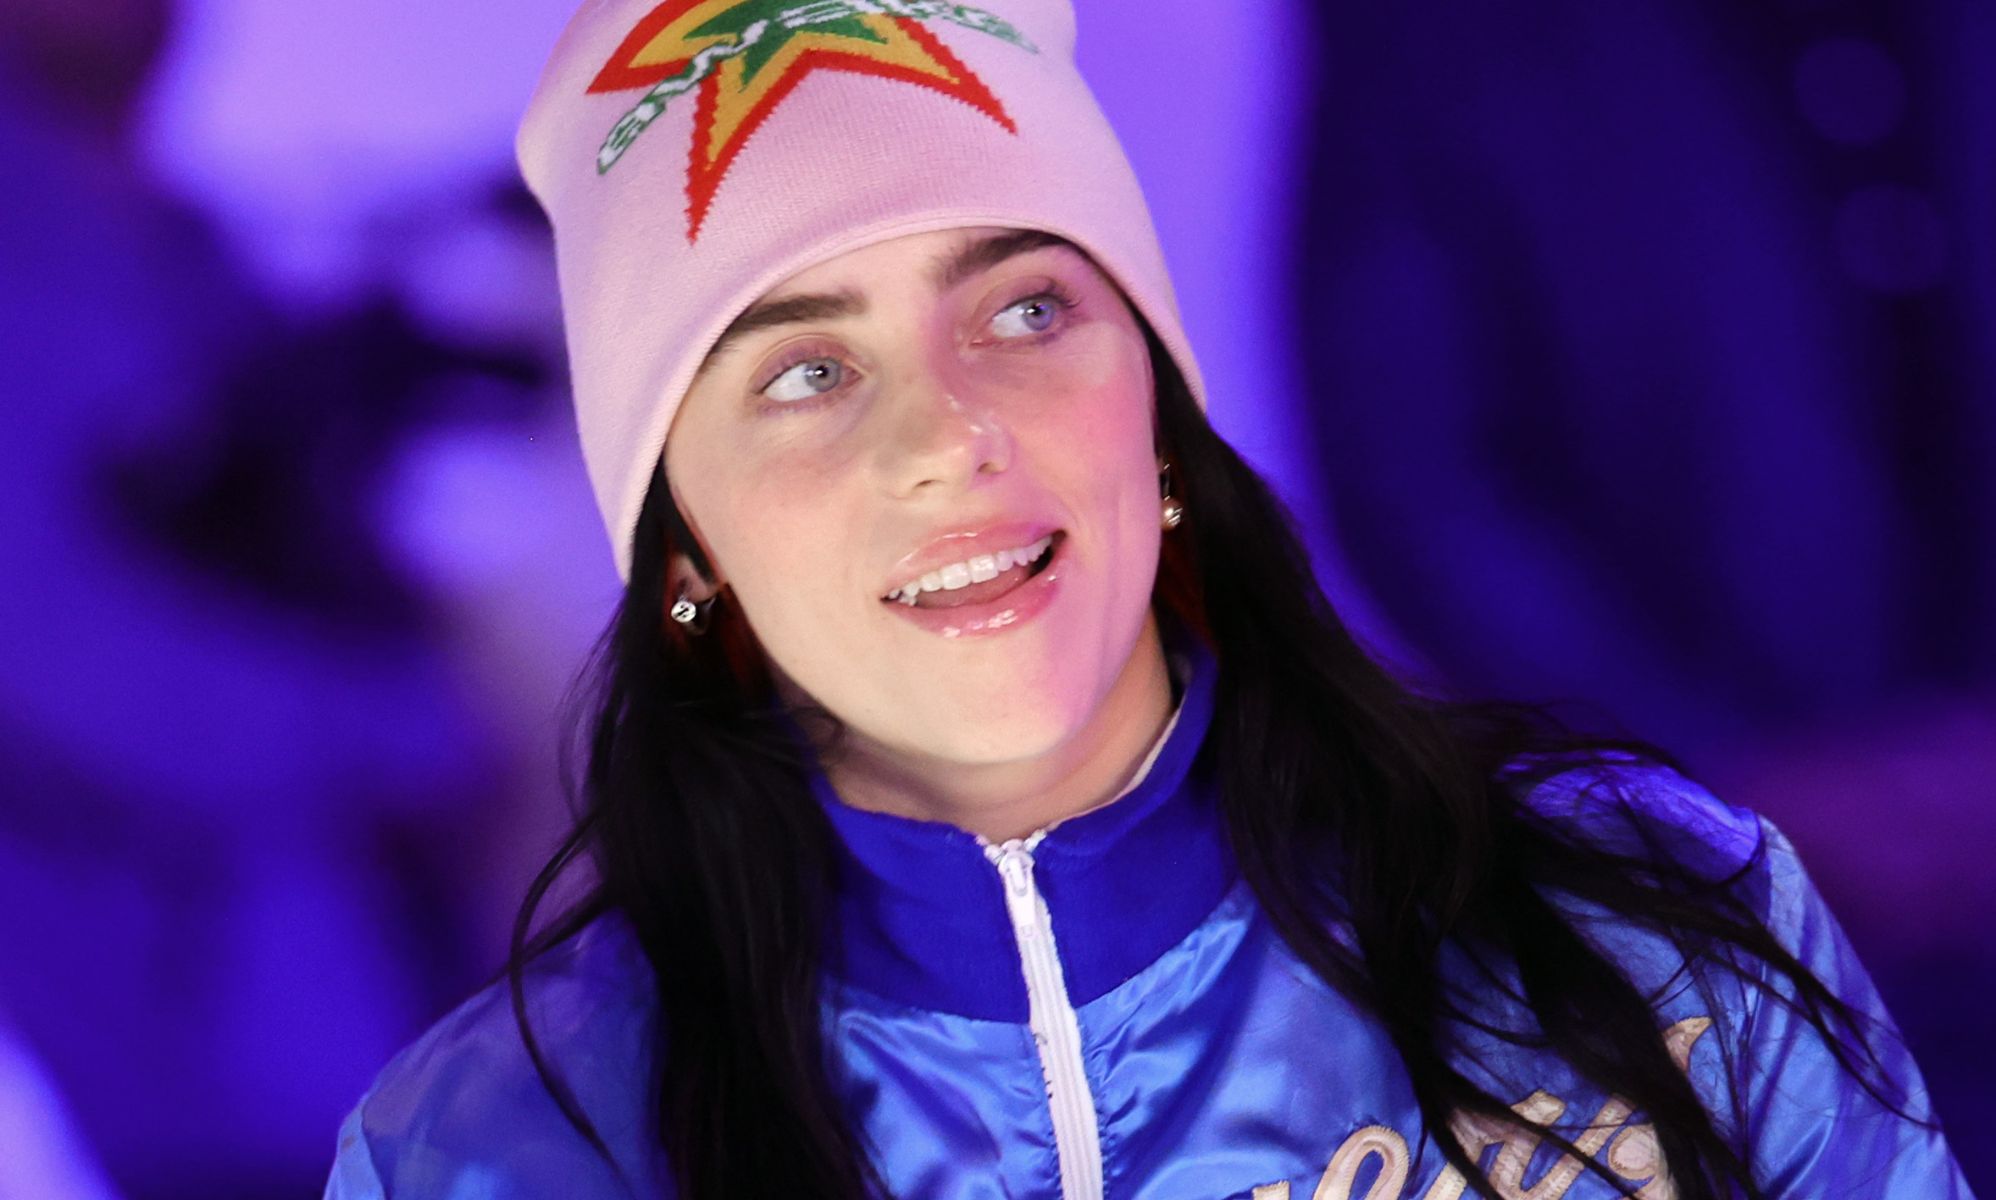 Billie Eilish breaks silence after coming out 'Wasn't it obvious?'